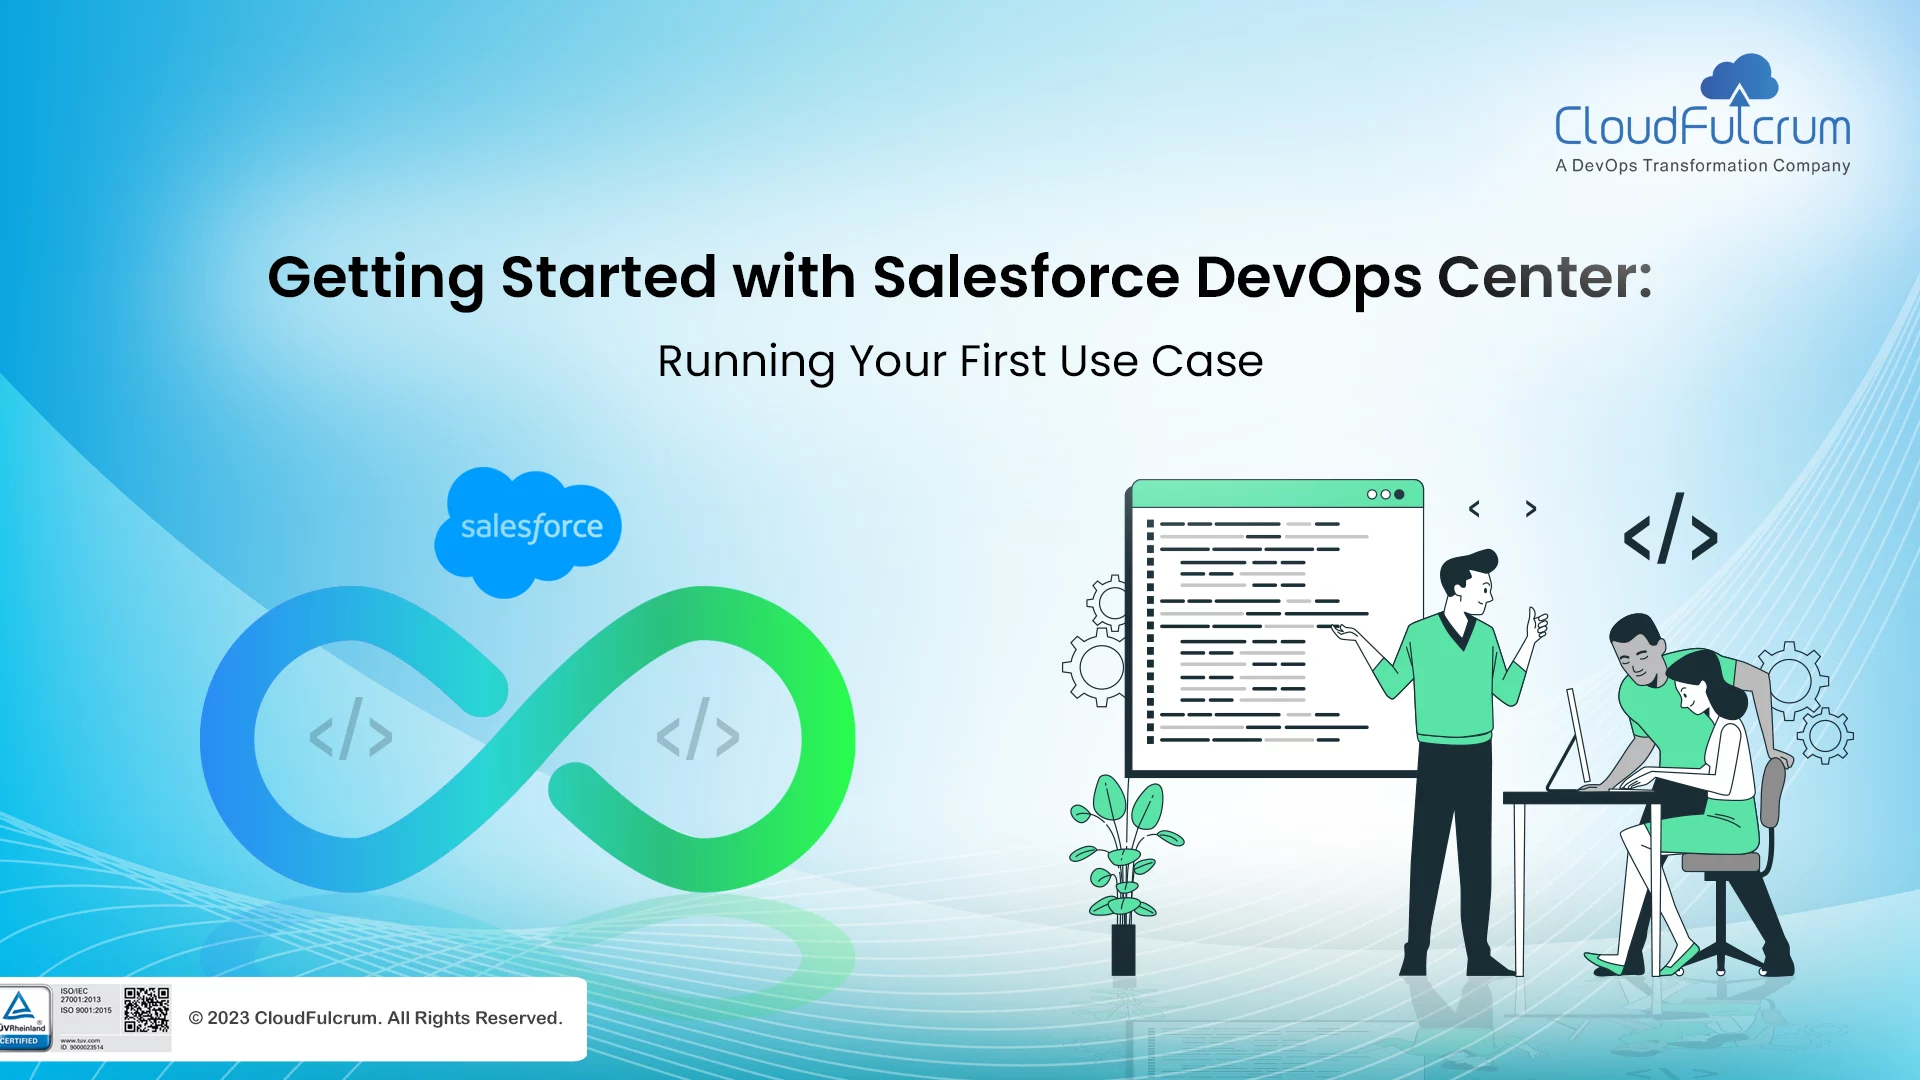 Getting Started with Salesforce DevOps Center: Running Your First Use Case